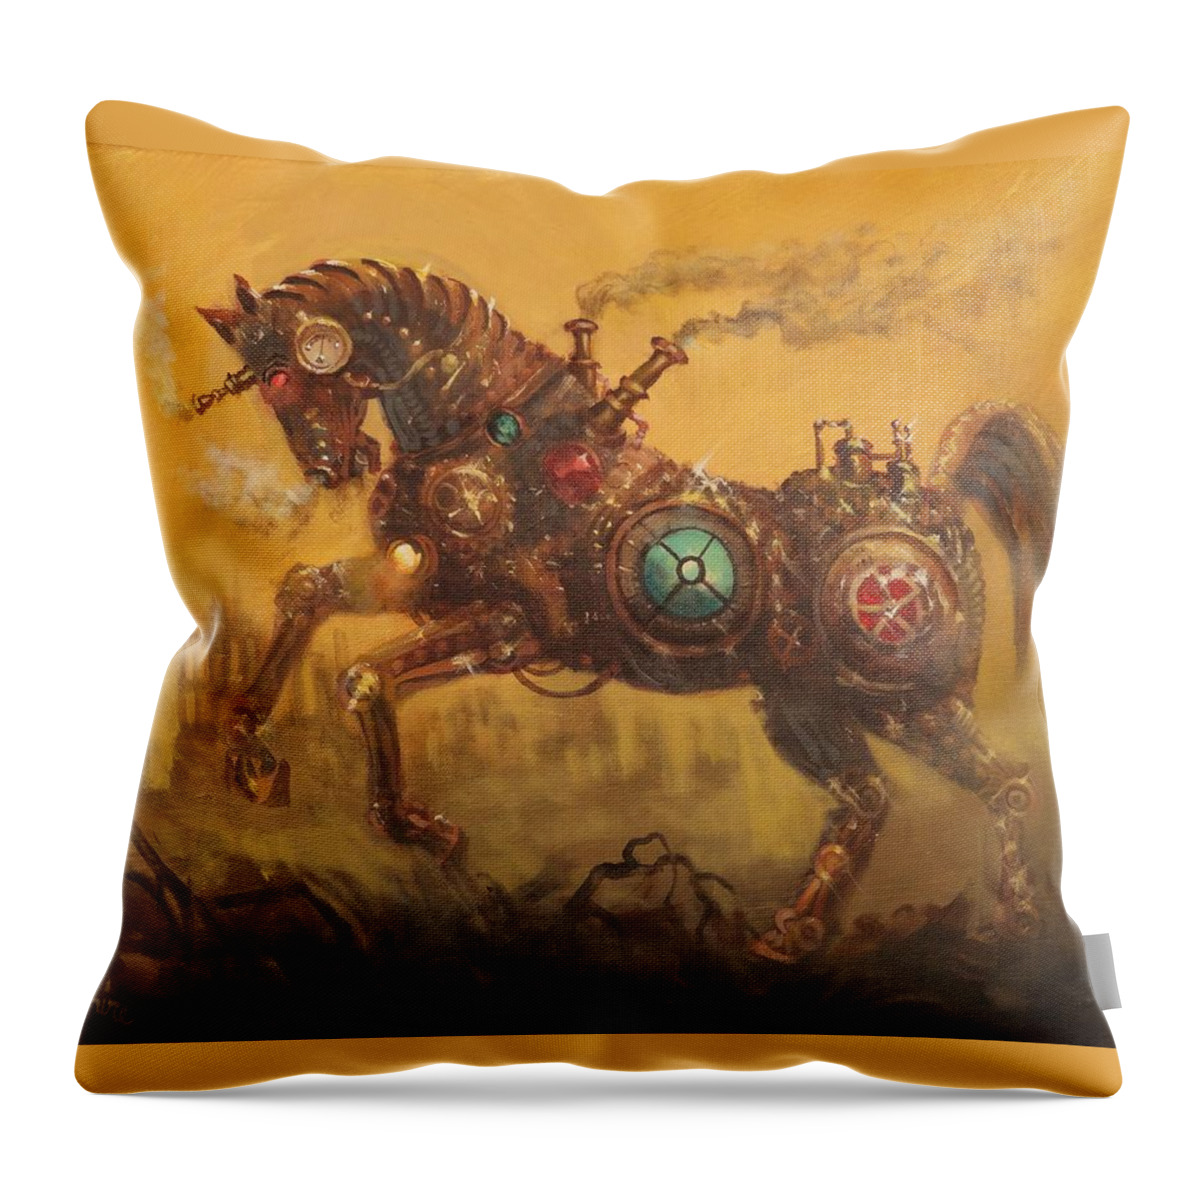 Steampunk Throw Pillow featuring the painting Steampunk War Horse by Tom Shropshire